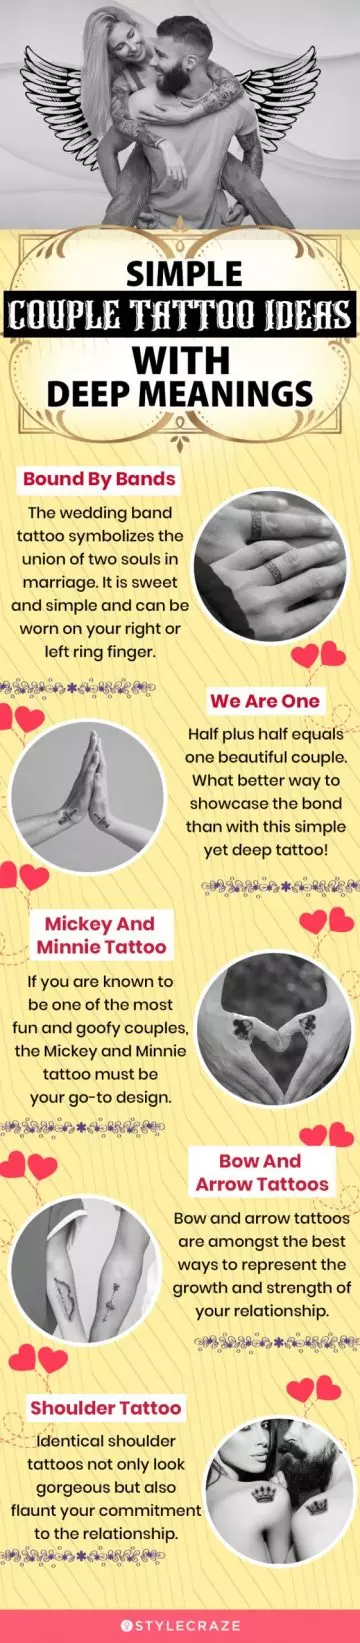 simple couple tattoo ideas with deep meanings (infographic)